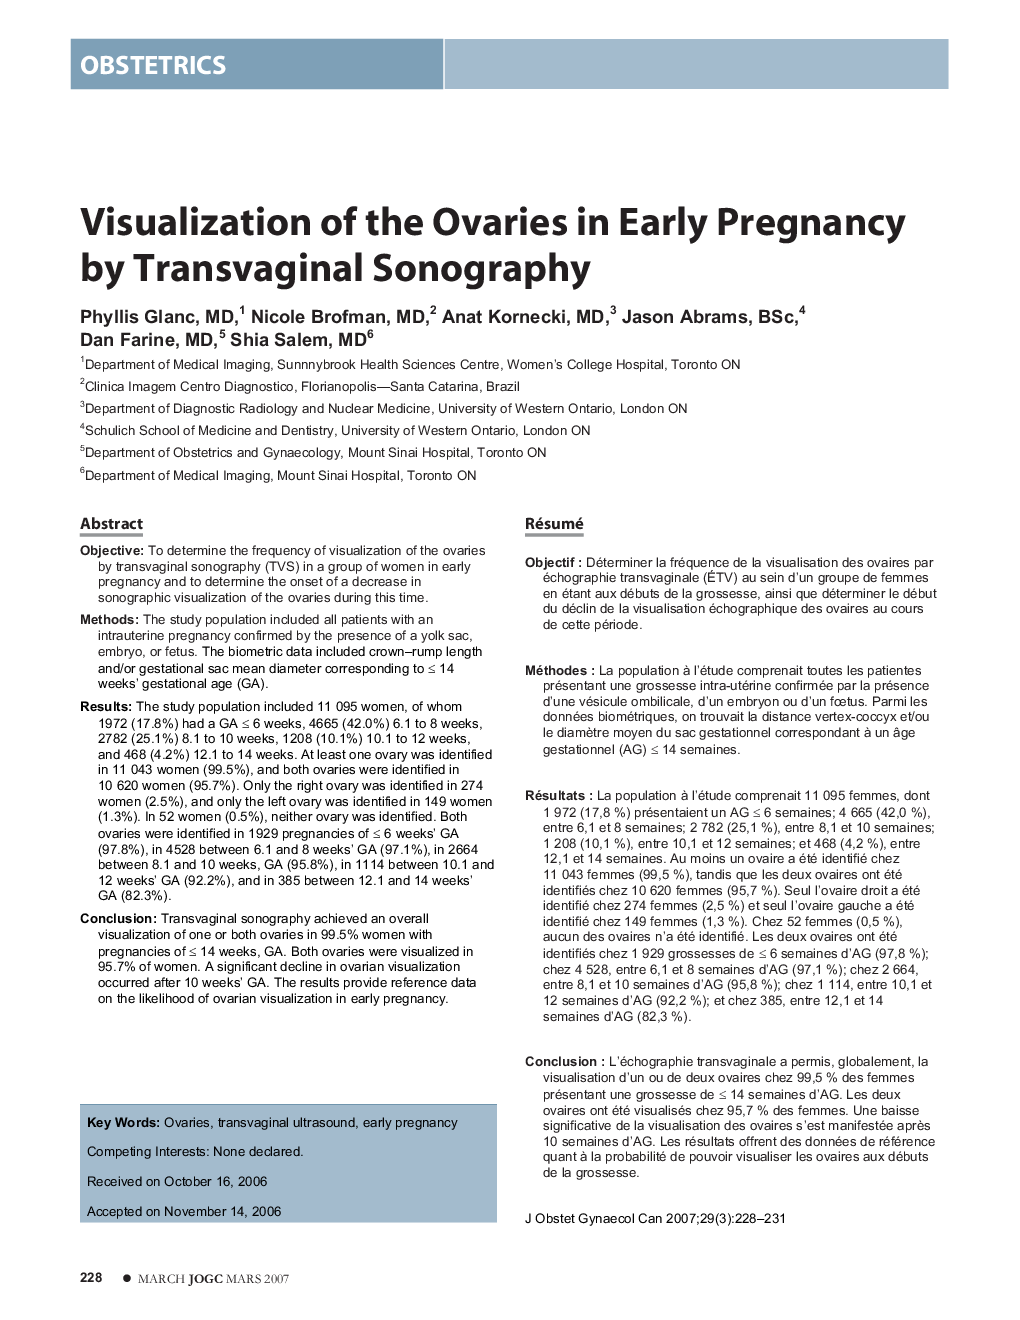 Visualization of the Ovaries in Early Pregnancy by Transvaginal Sonography